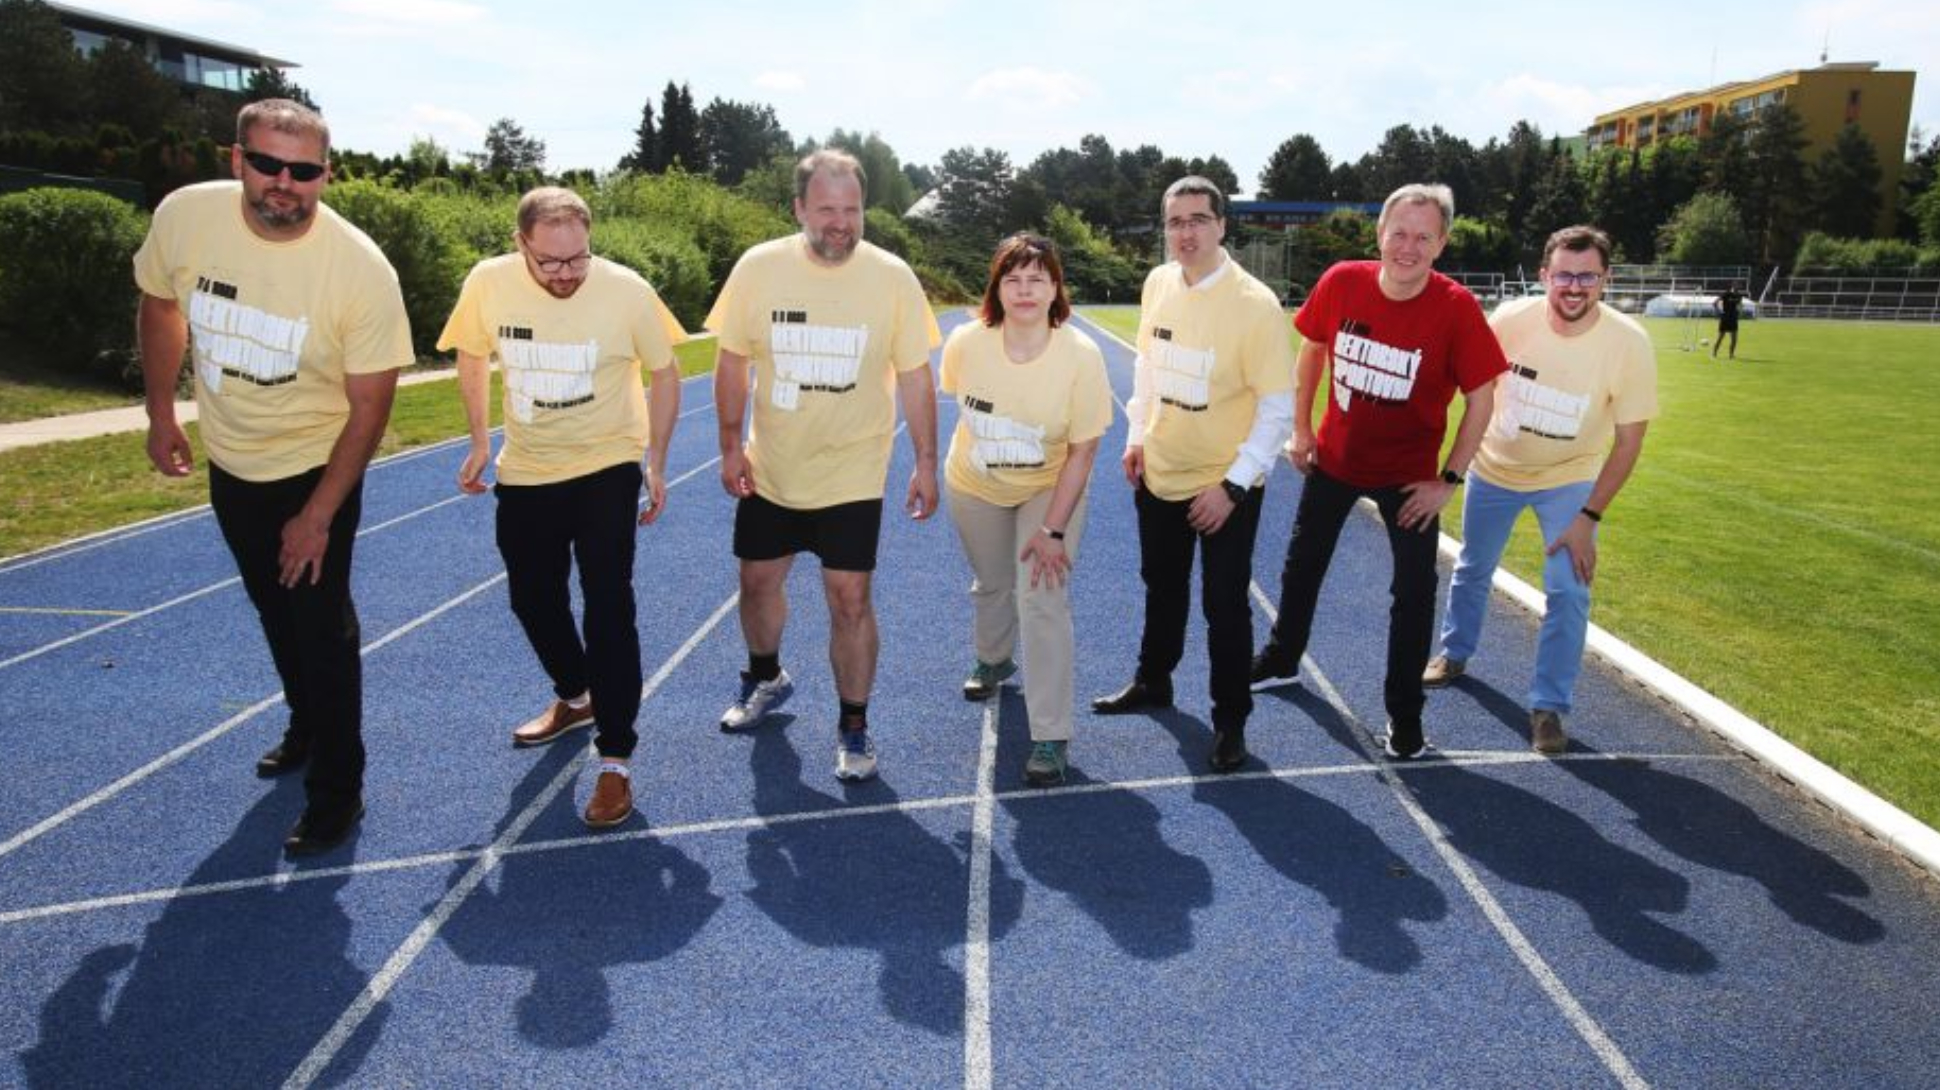 Students and staff took part in a great Rector's Sports Day